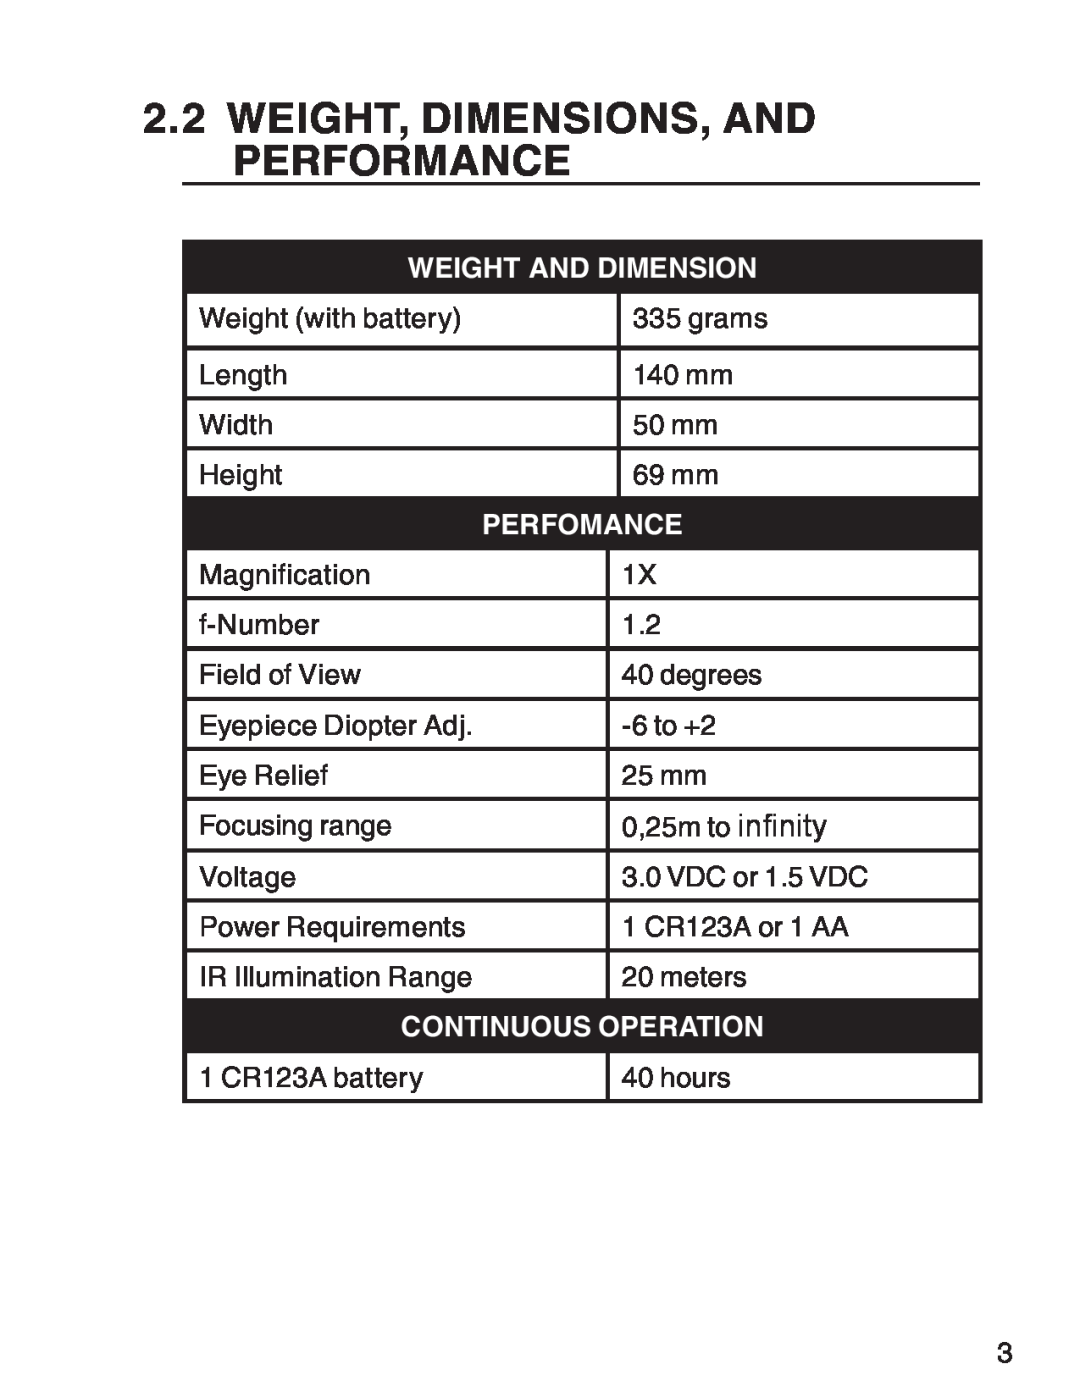 ATN 3 manual Weight, Dimensions, And Performance, Weight and Dimension, Perfomance, Continuous Operation 